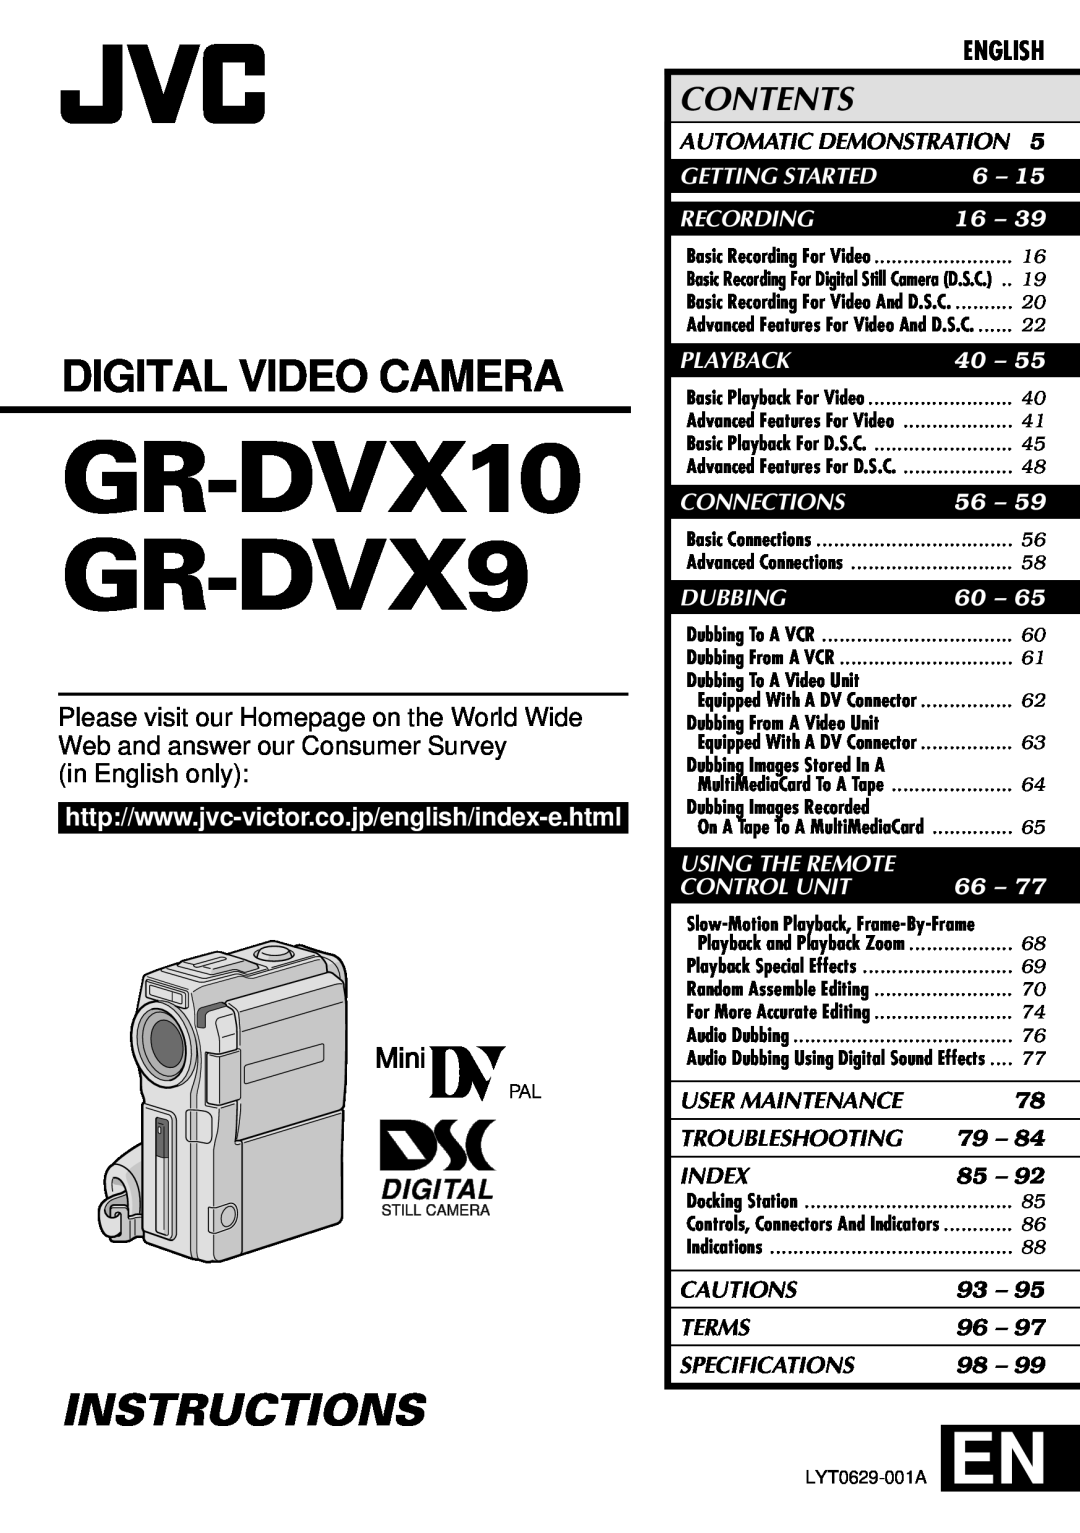 JVC GR-DVX10 specifications in English only, User Maintenance, Troubleshooting, Index, Cautions, Terms, Specifications 